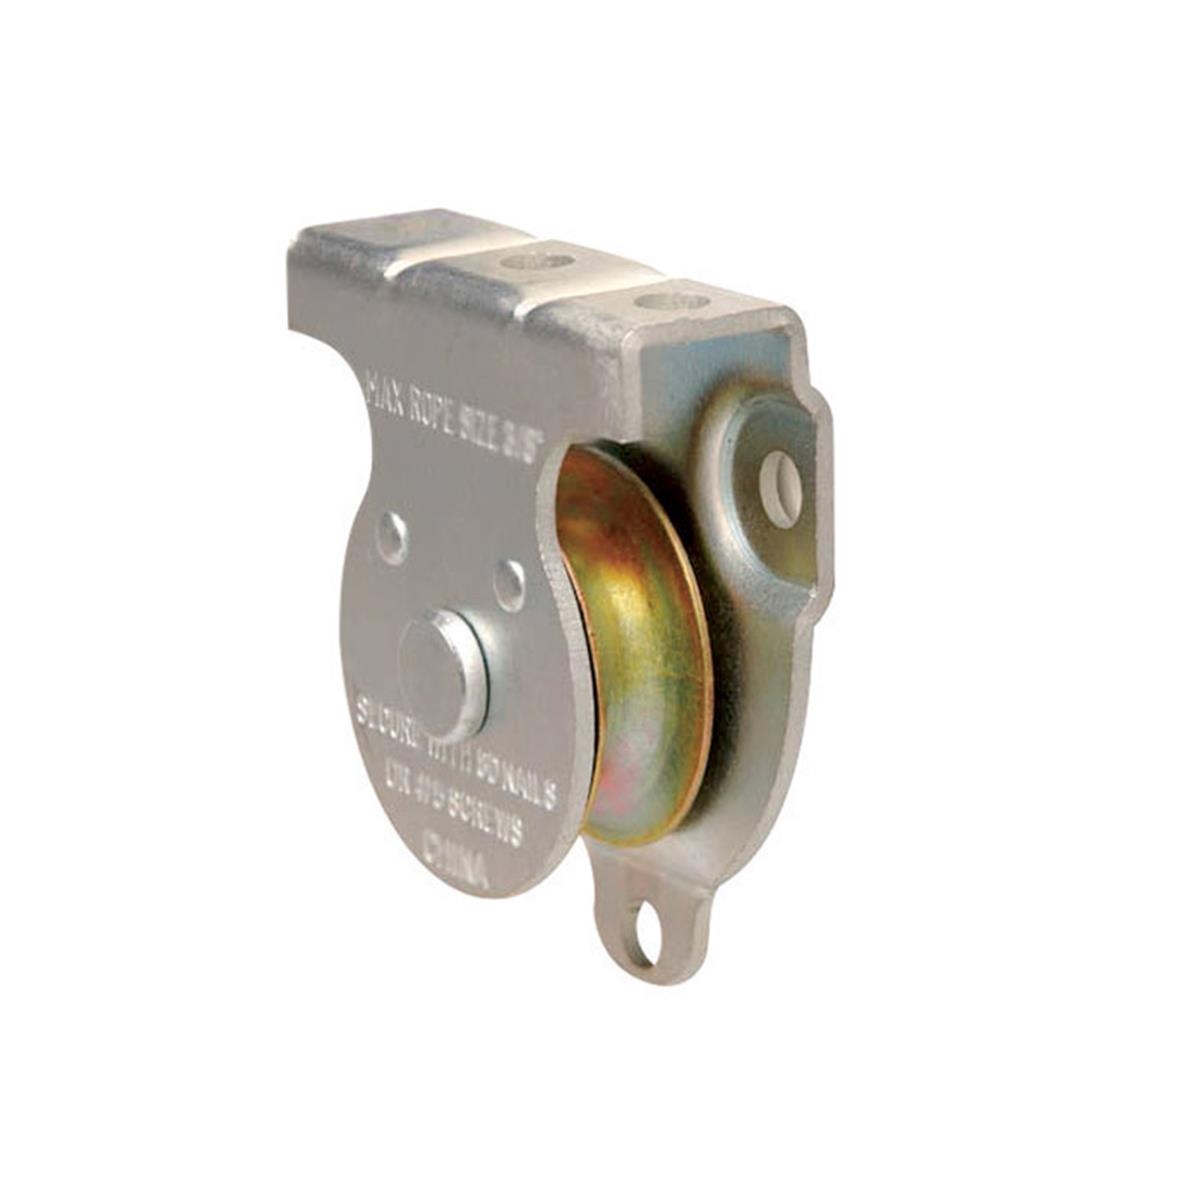 Picture of Apex Tool Group T7550501 1.5 in. Wall Ceiling Pulley- pack of 5